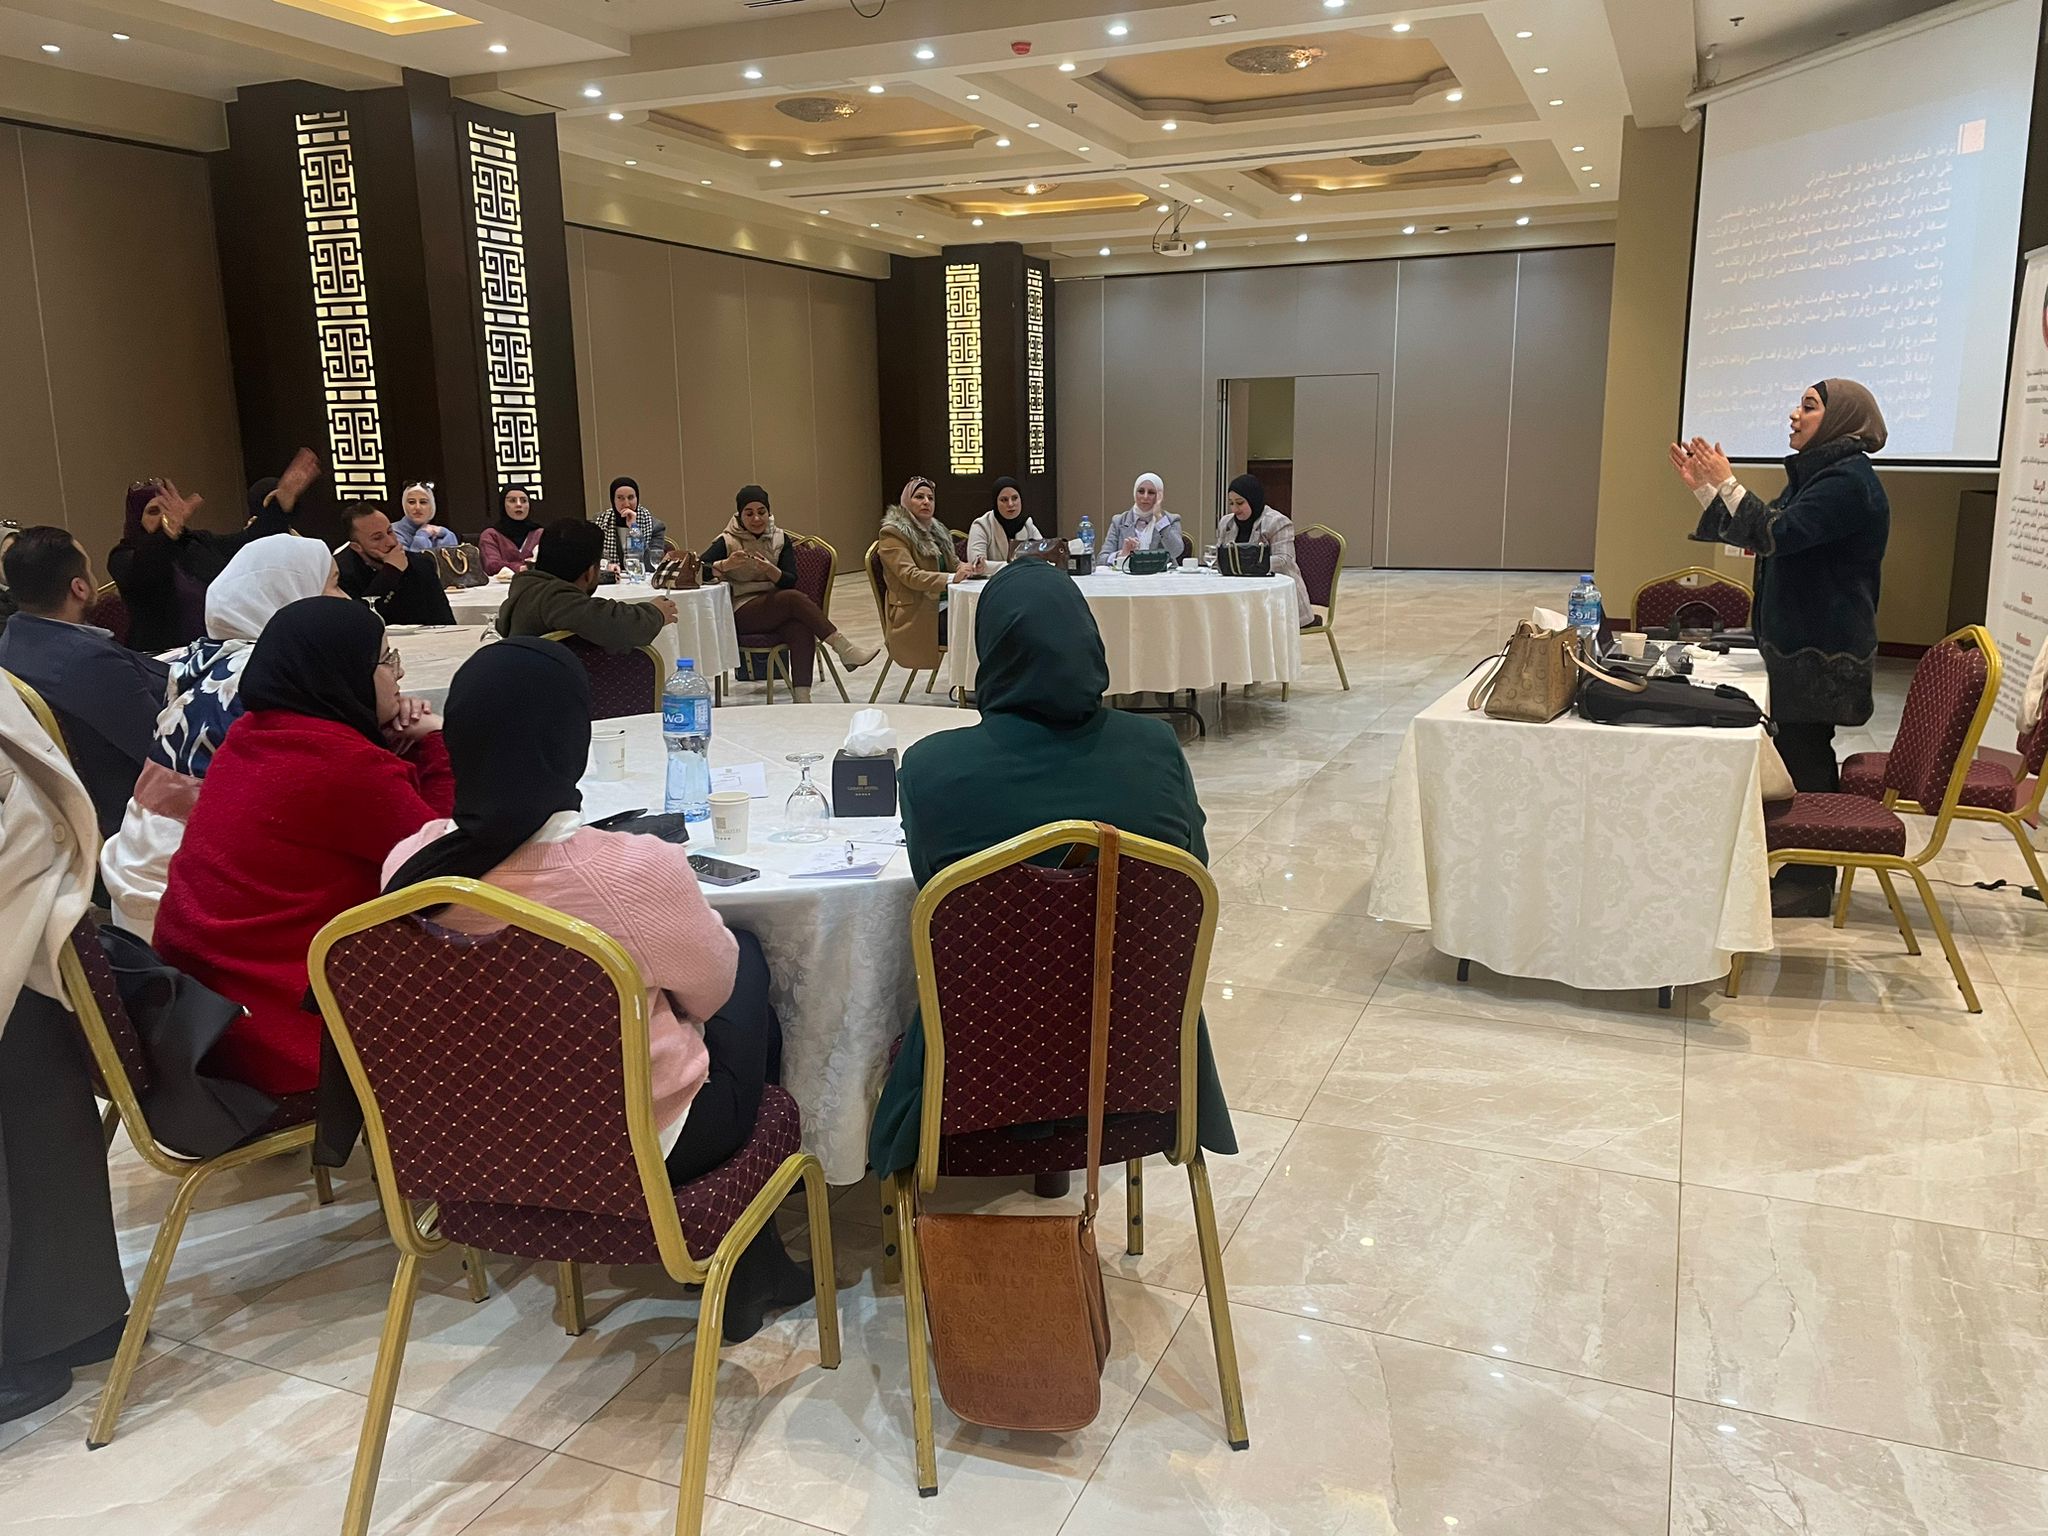 MUSAWA organizes a training on the impact of the lack of binding enforcement of the Convention on the Prevention of the Crime of Genocide, International Law and International Humanitarian Law on their credibility and confidence in them